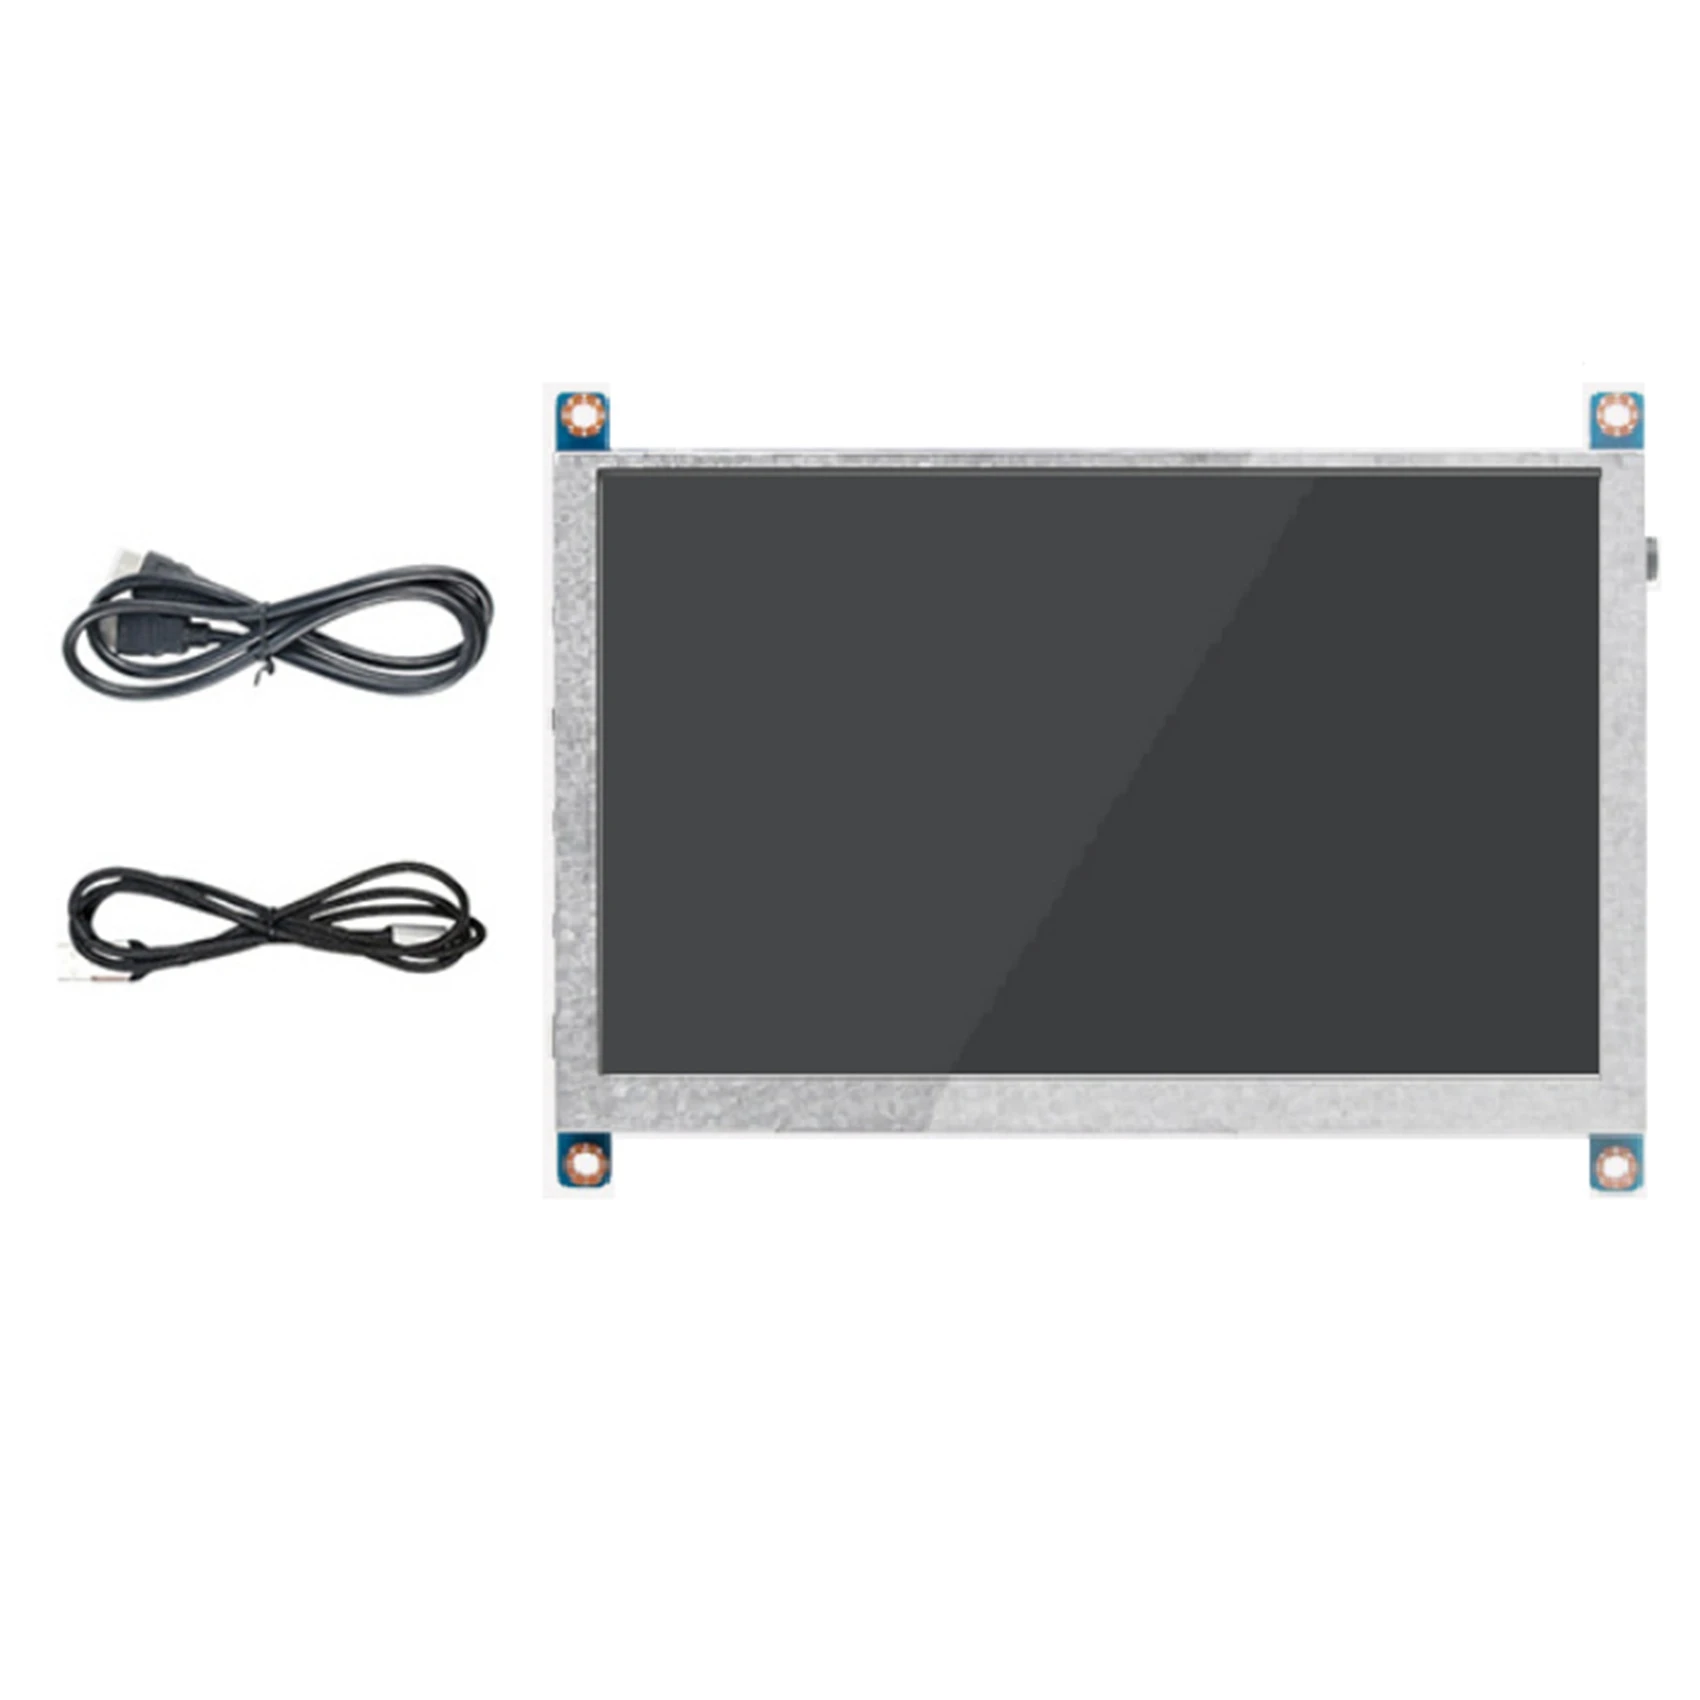 

7 Inch IN No Touch Screen Monitor 1024X600 HD Display HDMI-Compatible VGA Interface Display for Raspberry Pi